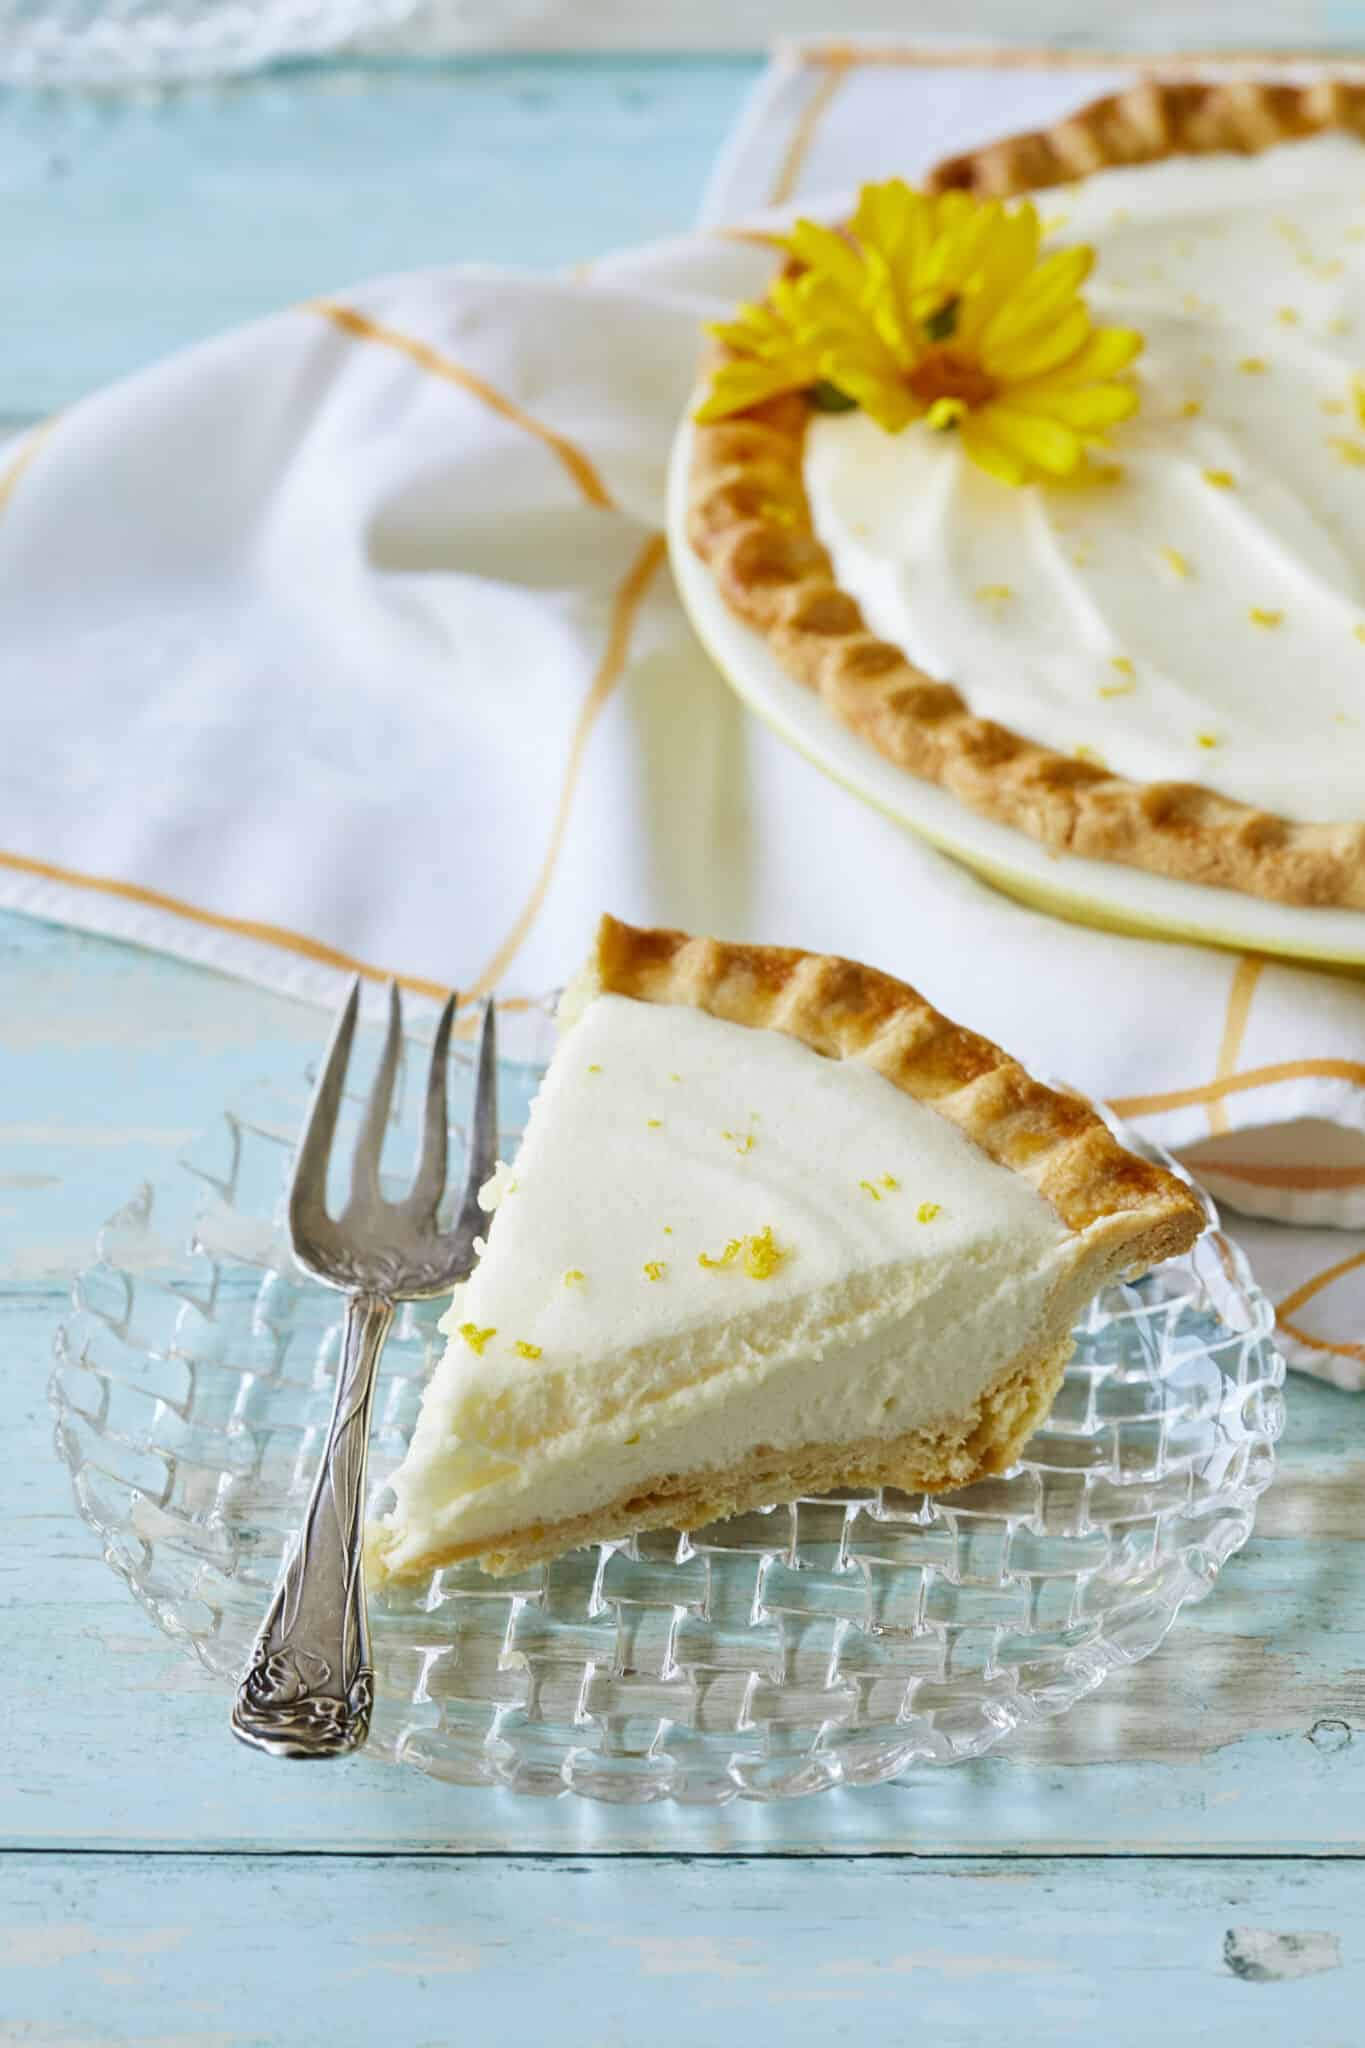 Luscious Creamy Lemon Chiffon Pie has a golden curst with a white, silky filling, topped with refreshing lemon zest and two flowers. A slice is served on a glass dessert plate, showing the flaky crust and smooth filling.